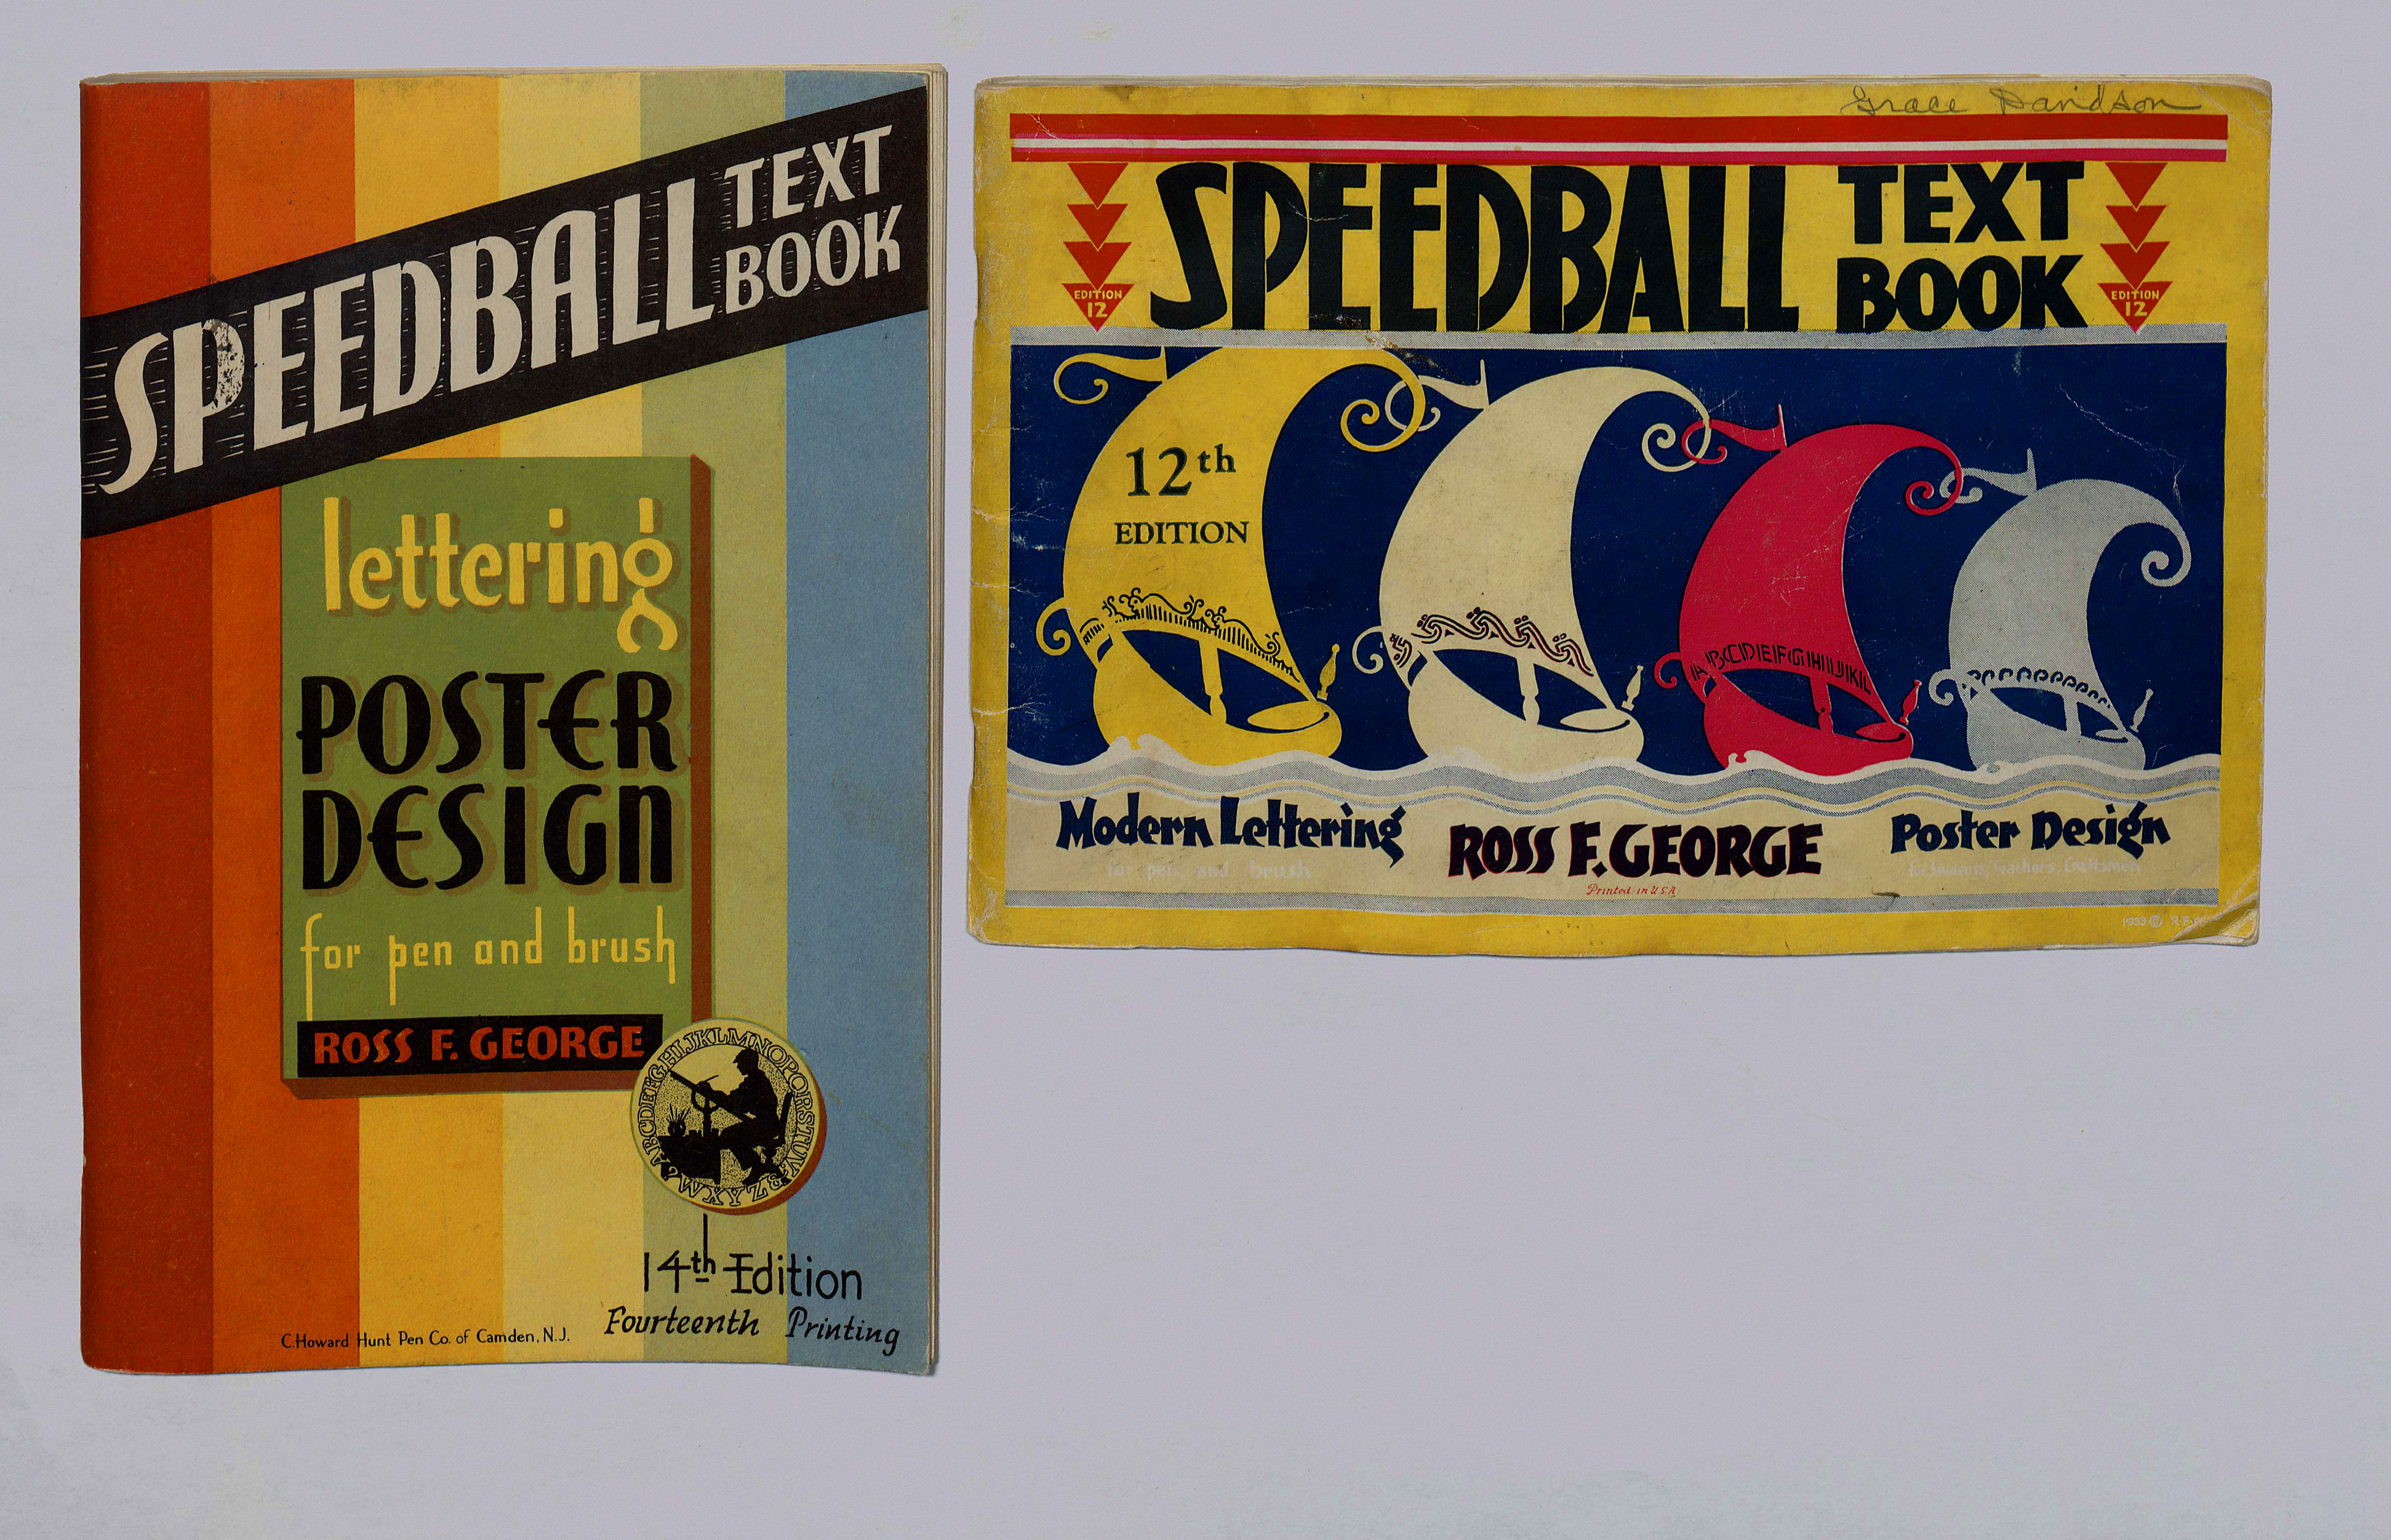 Two scarce instruction books produced by the Speedball pen company, still in operation today. The company name reflects its origins: Speedball began as a specialty company producing nibbed pens specifically for the quick work of show card lettering. 